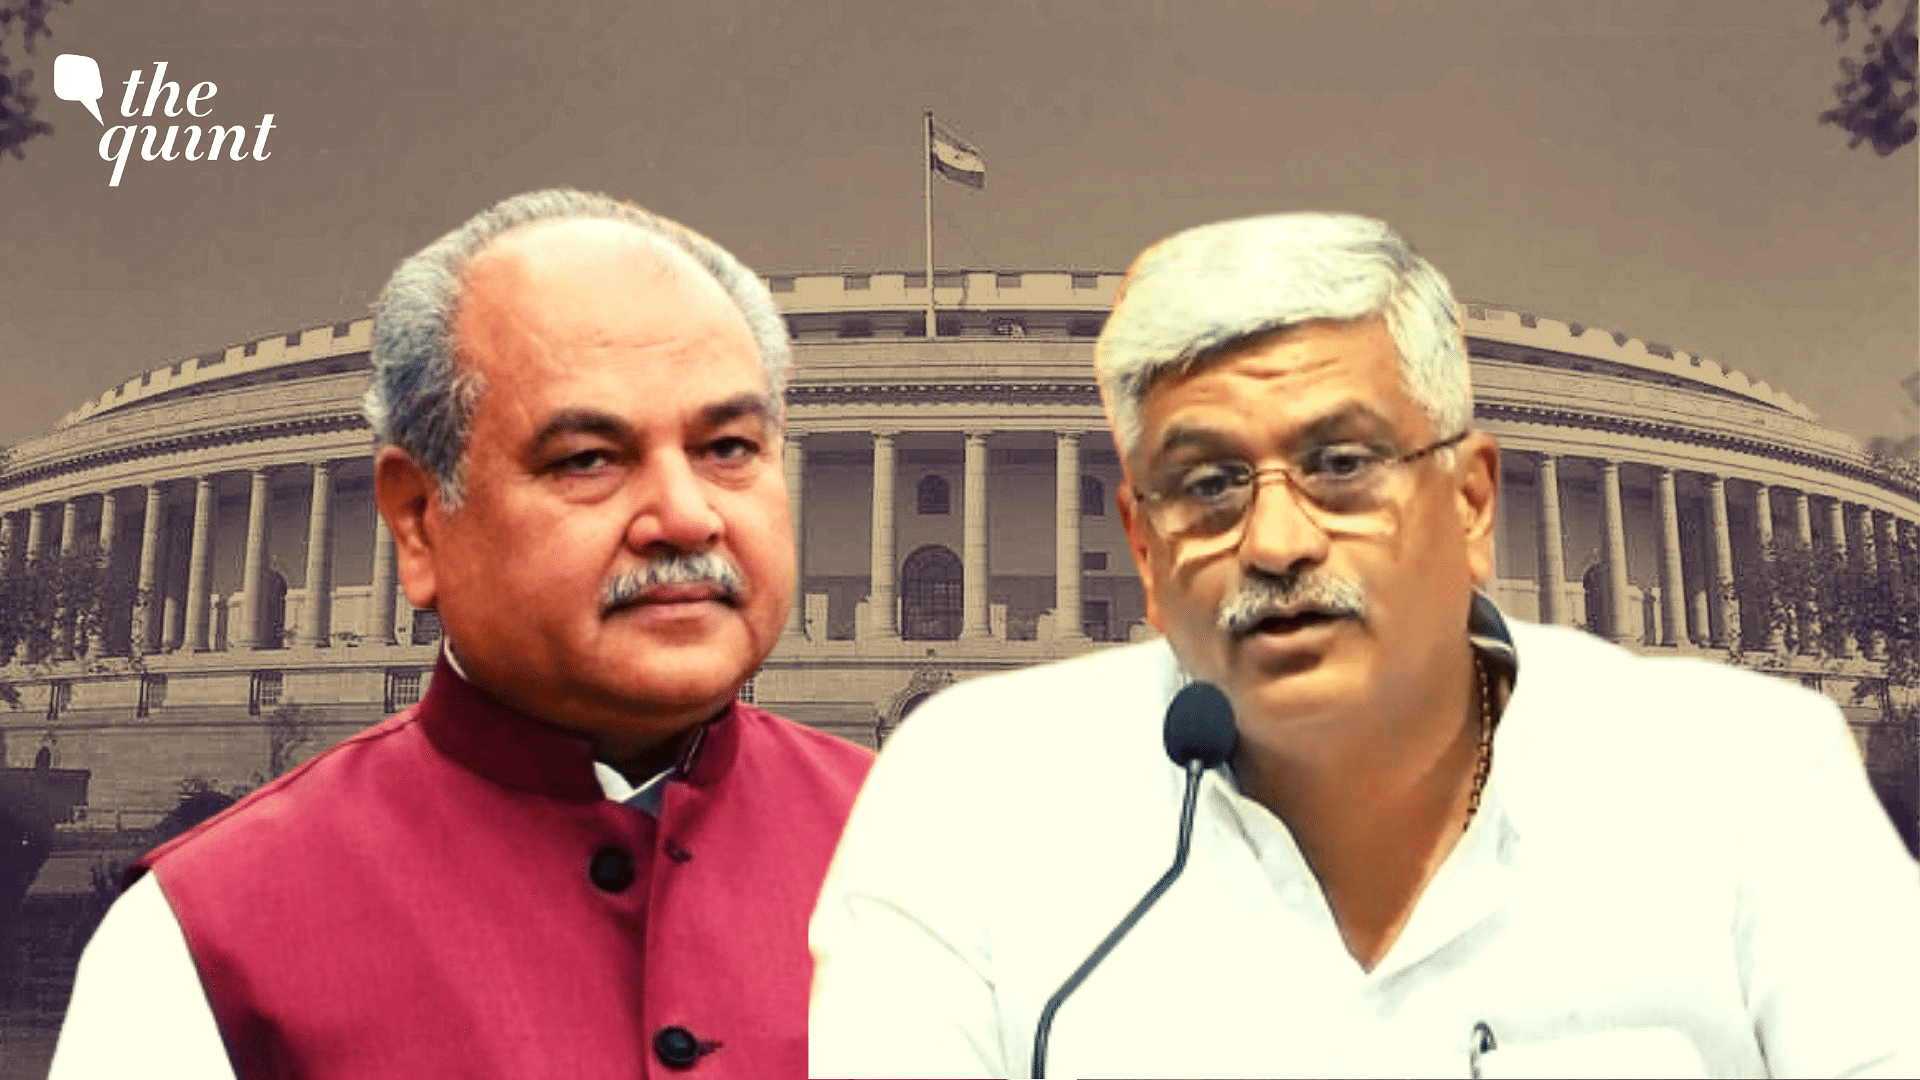 <div class="paragraphs"><p>The <a href="https://www.thequint.com/topic/bharatiya-janata-party">Bharatiya Janata Party (BJP)</a> on Wednesday, 1 June, appointed Union ministers in-charge for the <a href="https://www.thequint.com/topic/rajya-sabha-polls">Rajya Sabha polls</a>, scheduled to take place on 10 June.</p></div>